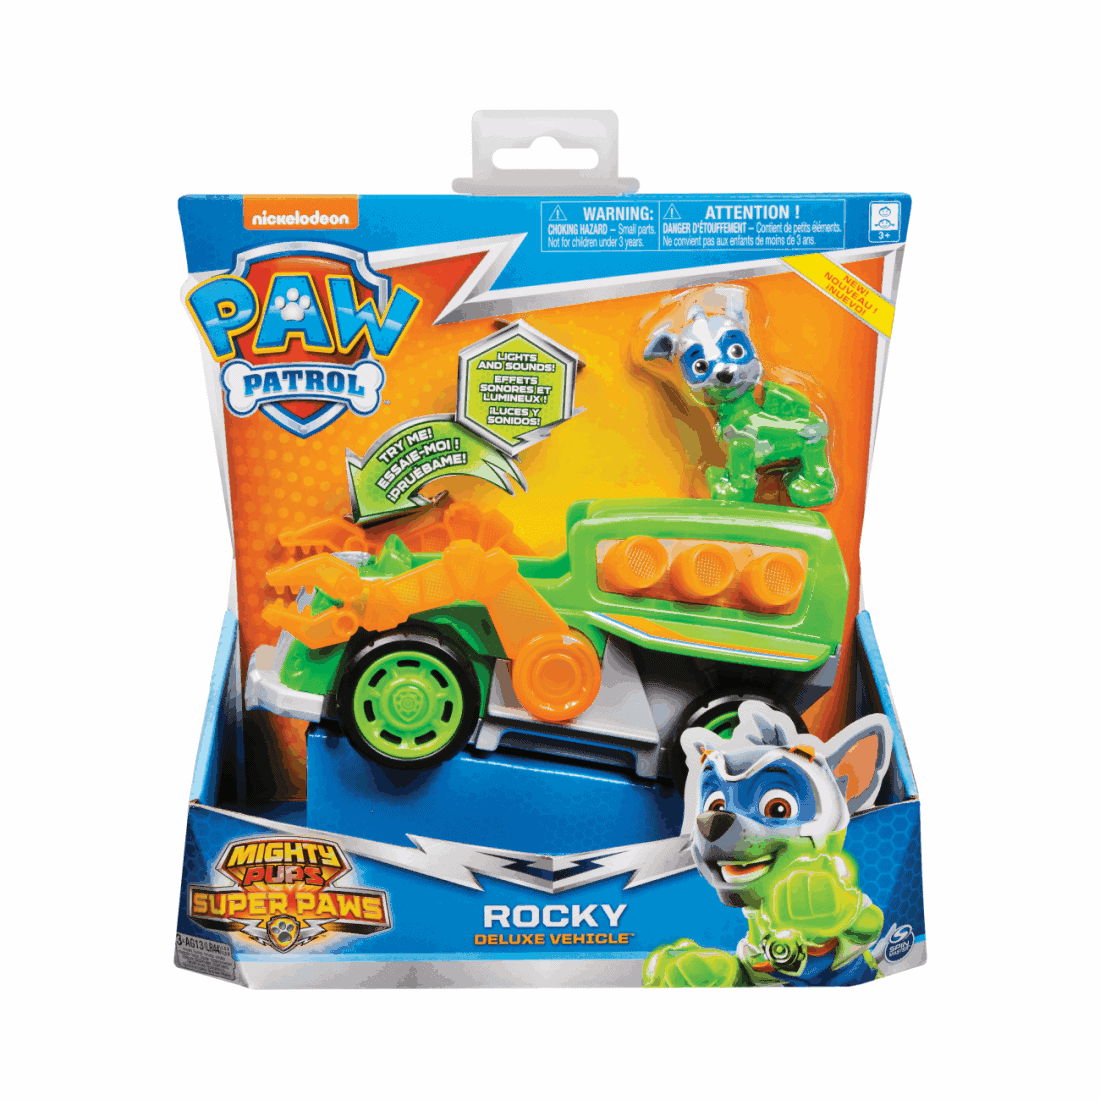 Spin Master Paw Patrol - Mighty Pups Super Paws - Rocky Deluxe Vehicle